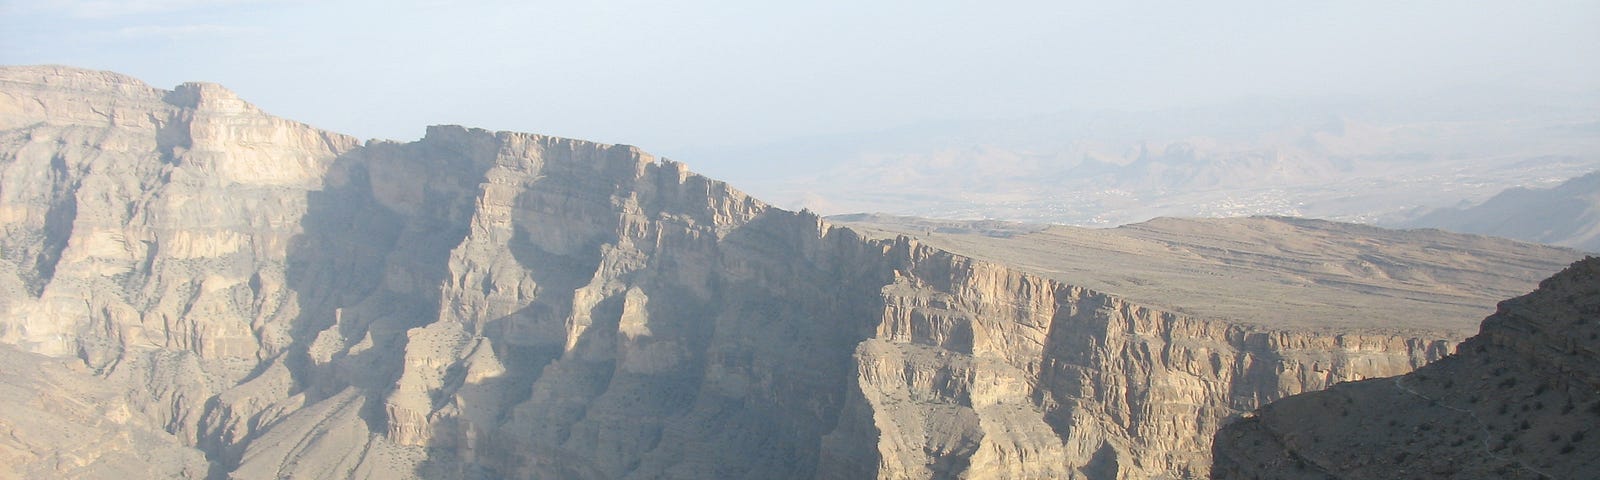 Picture of a canyon taken from a mountaintop at Jebel Shams in Oman